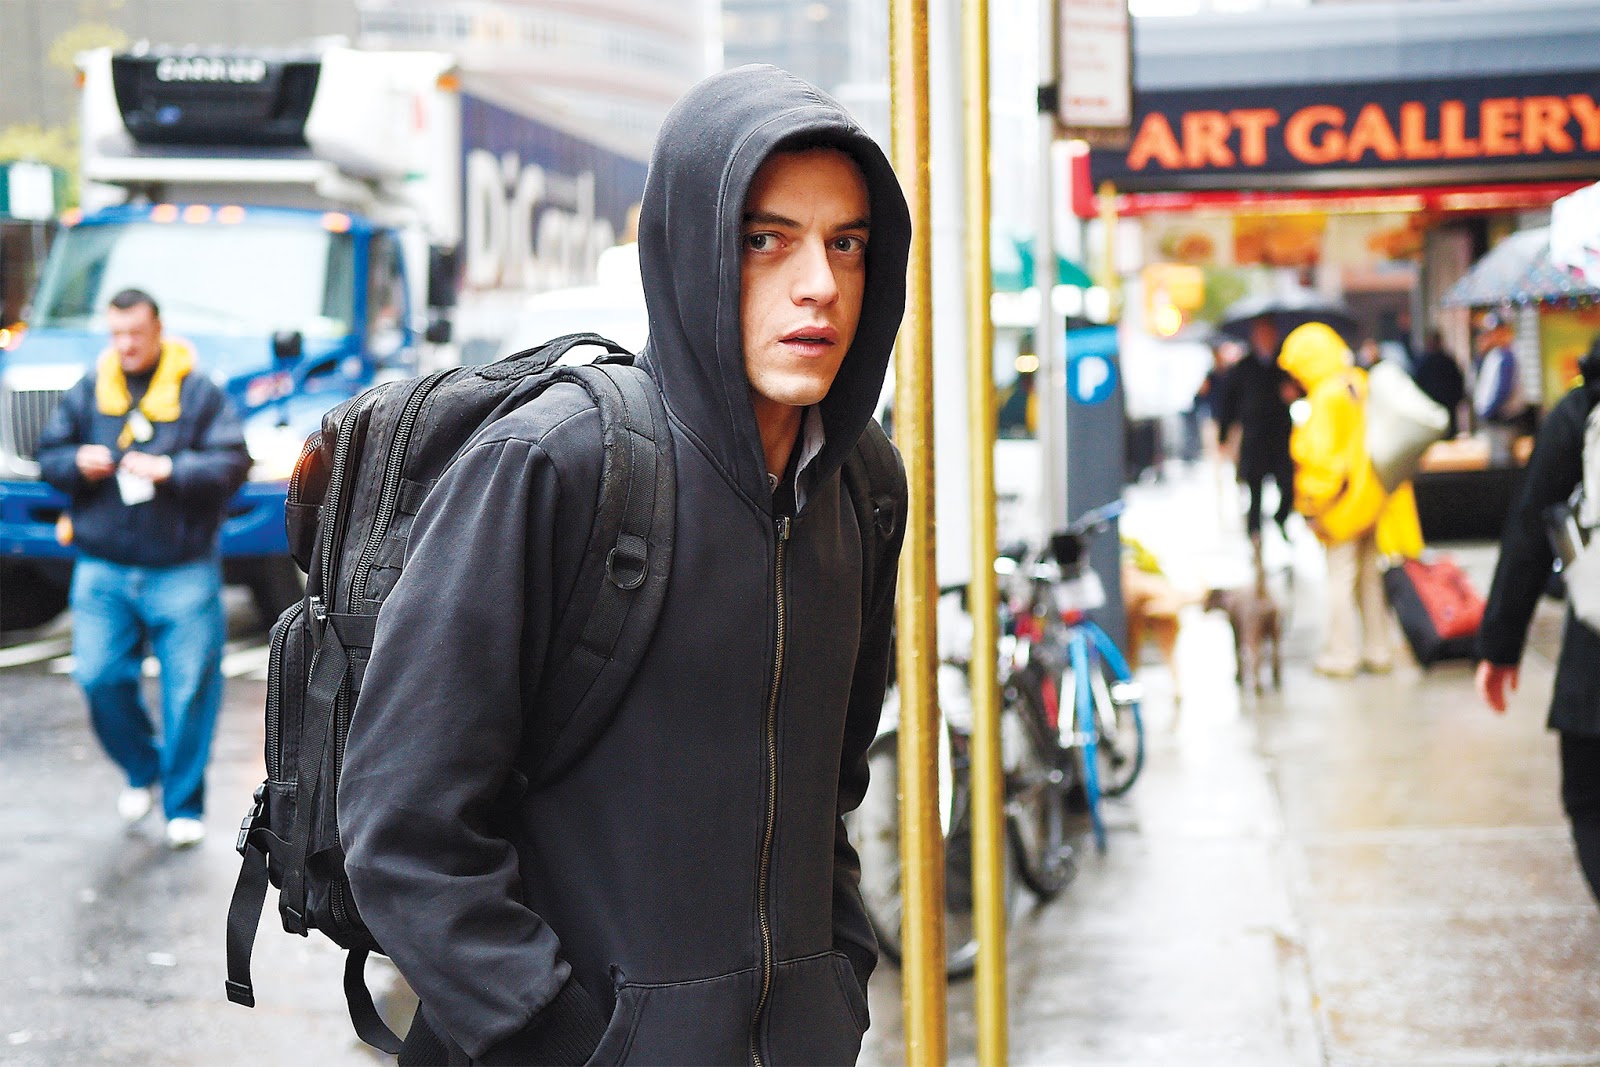 Mr. Robot' Final Season 4 Trailer: The Hacker War Comes To An End In October